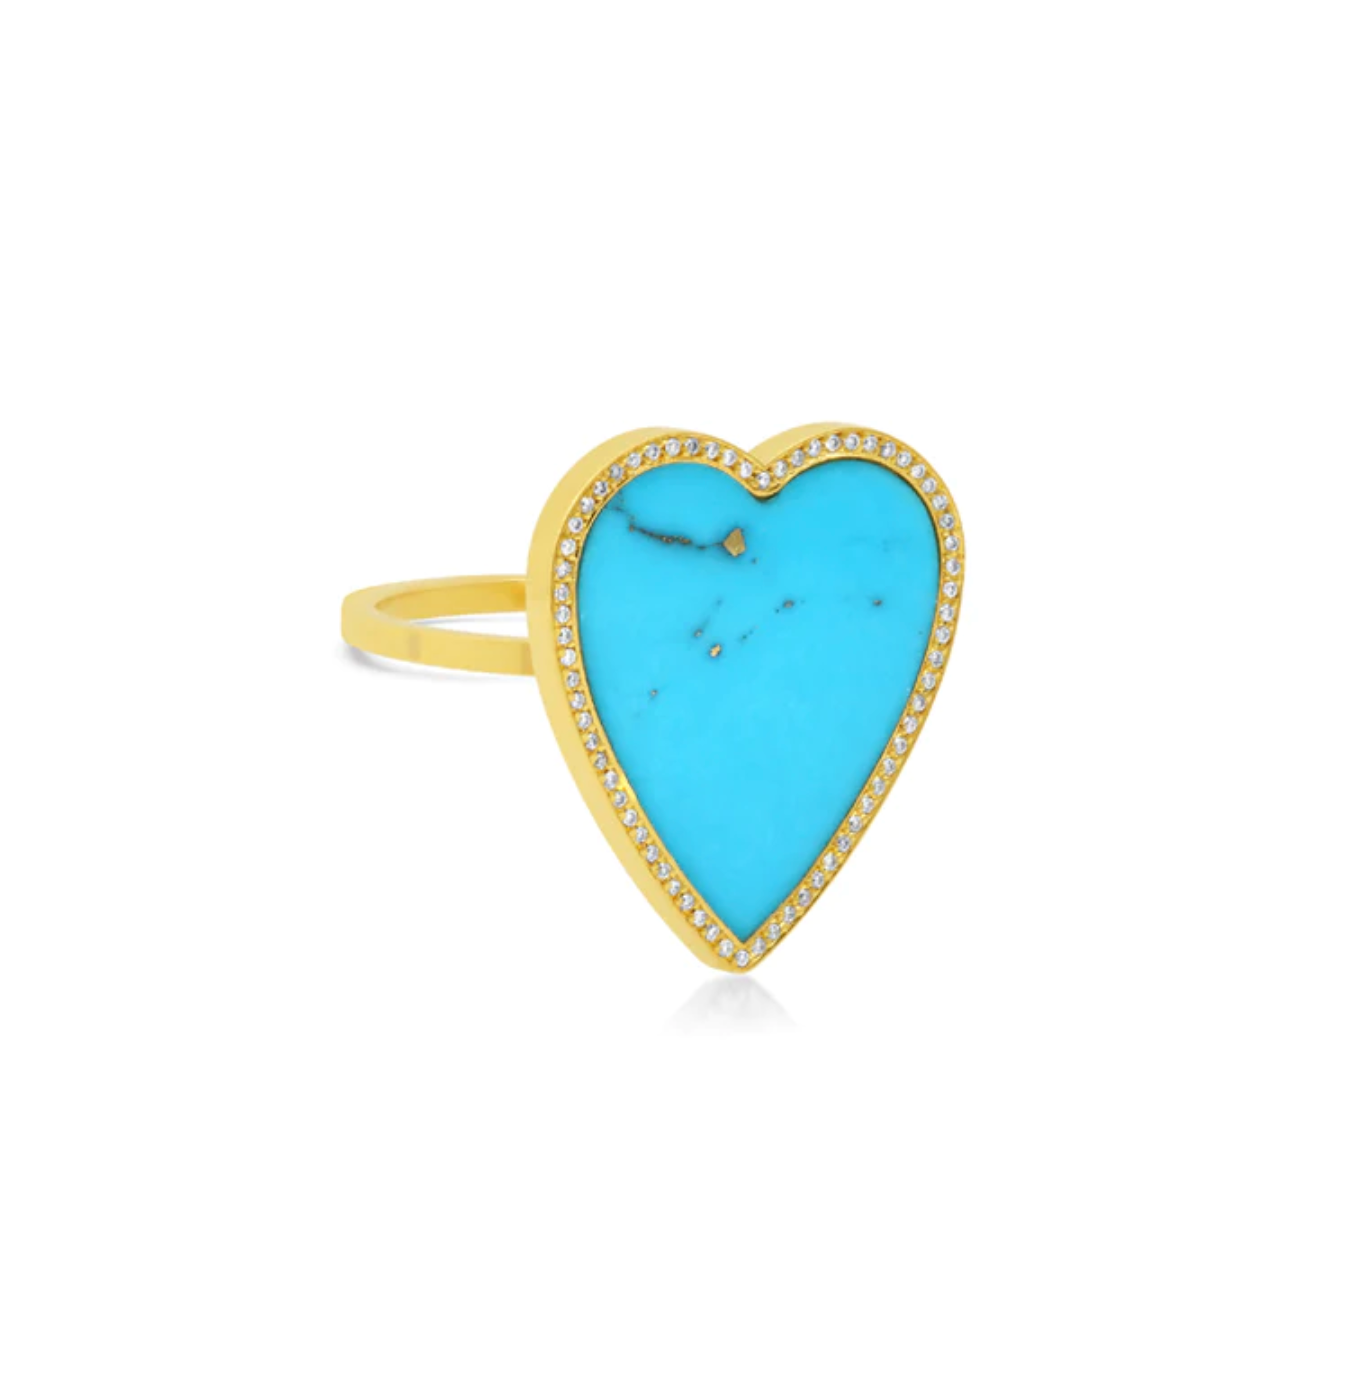 Turquoise Inlay Heart Ring with Diamonds